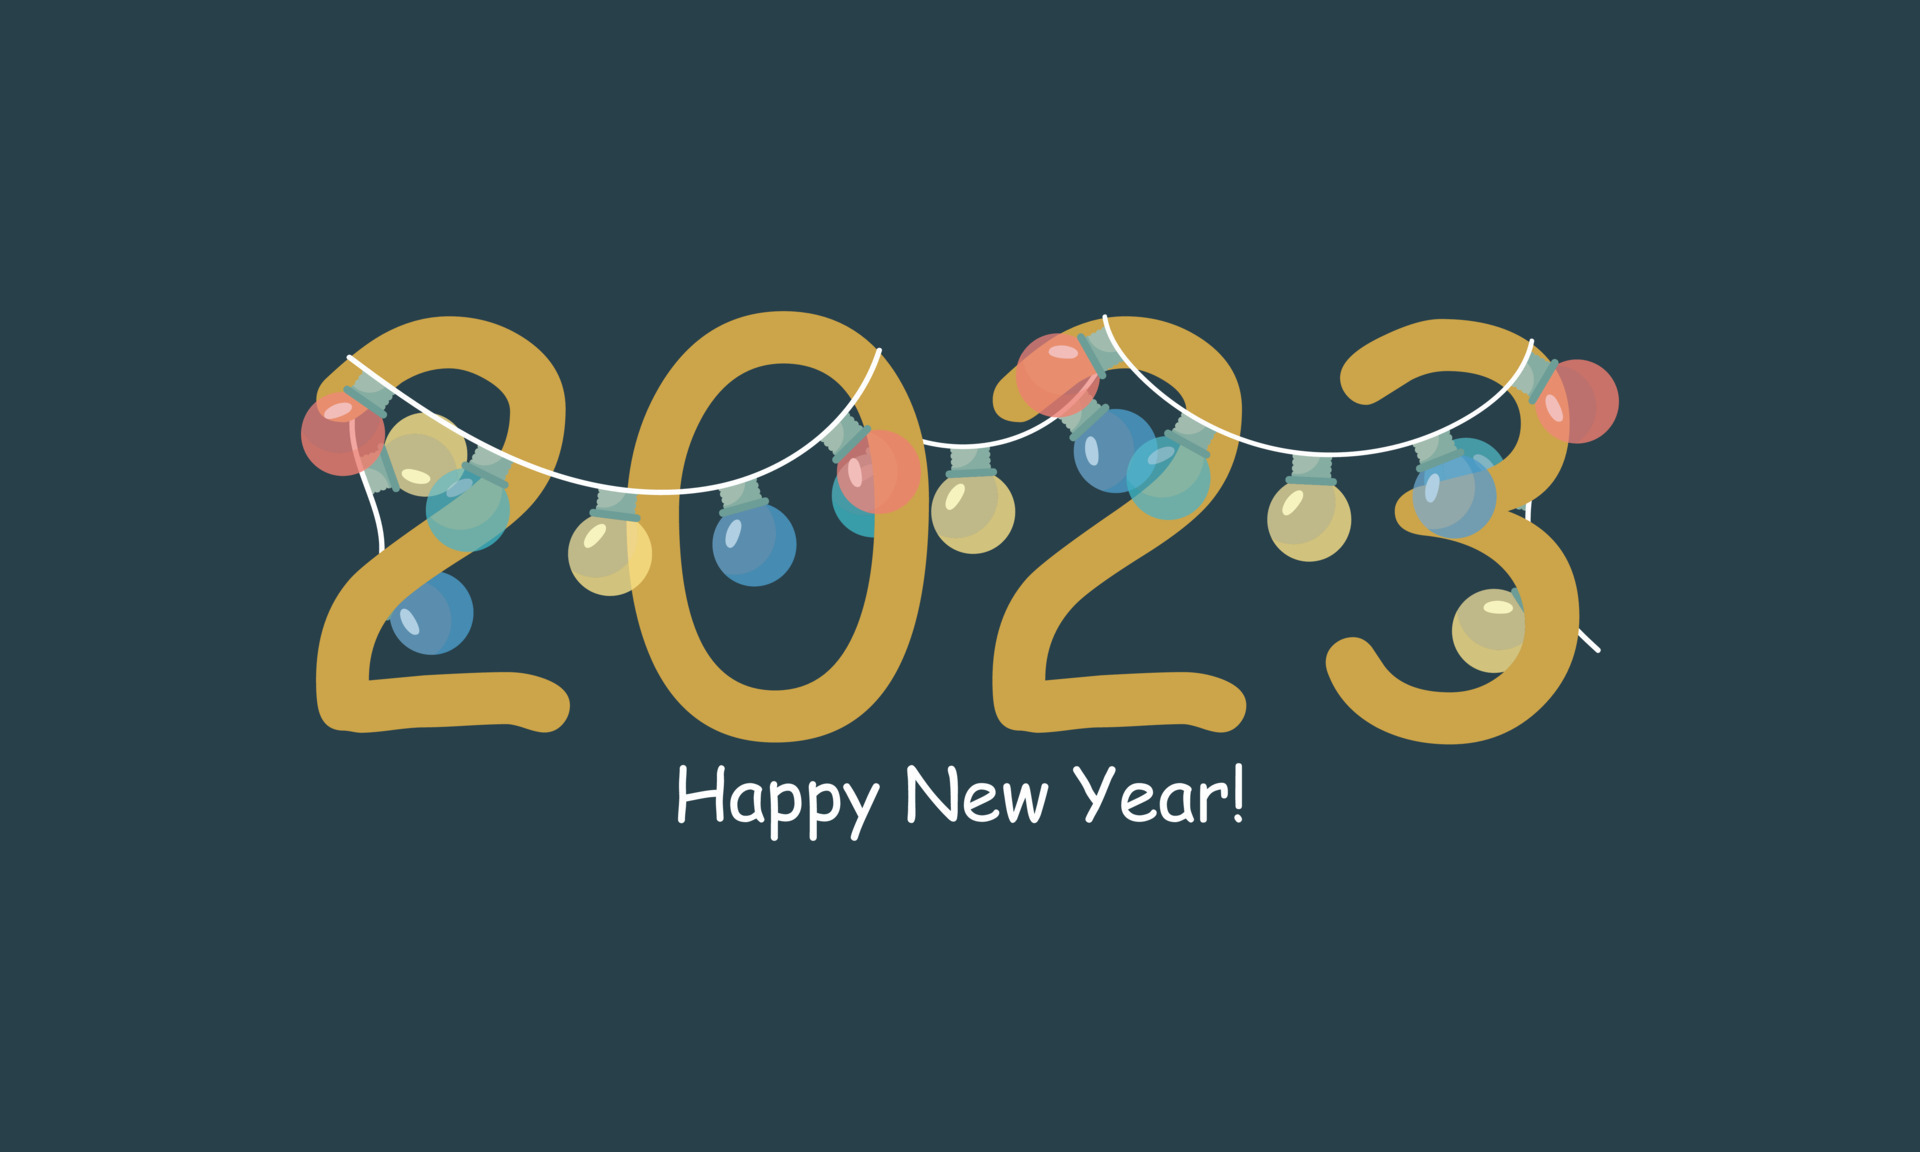 Merry Christmas and Happy New Year design with 2023 numbers and garland of light bulbs. Vector illustration